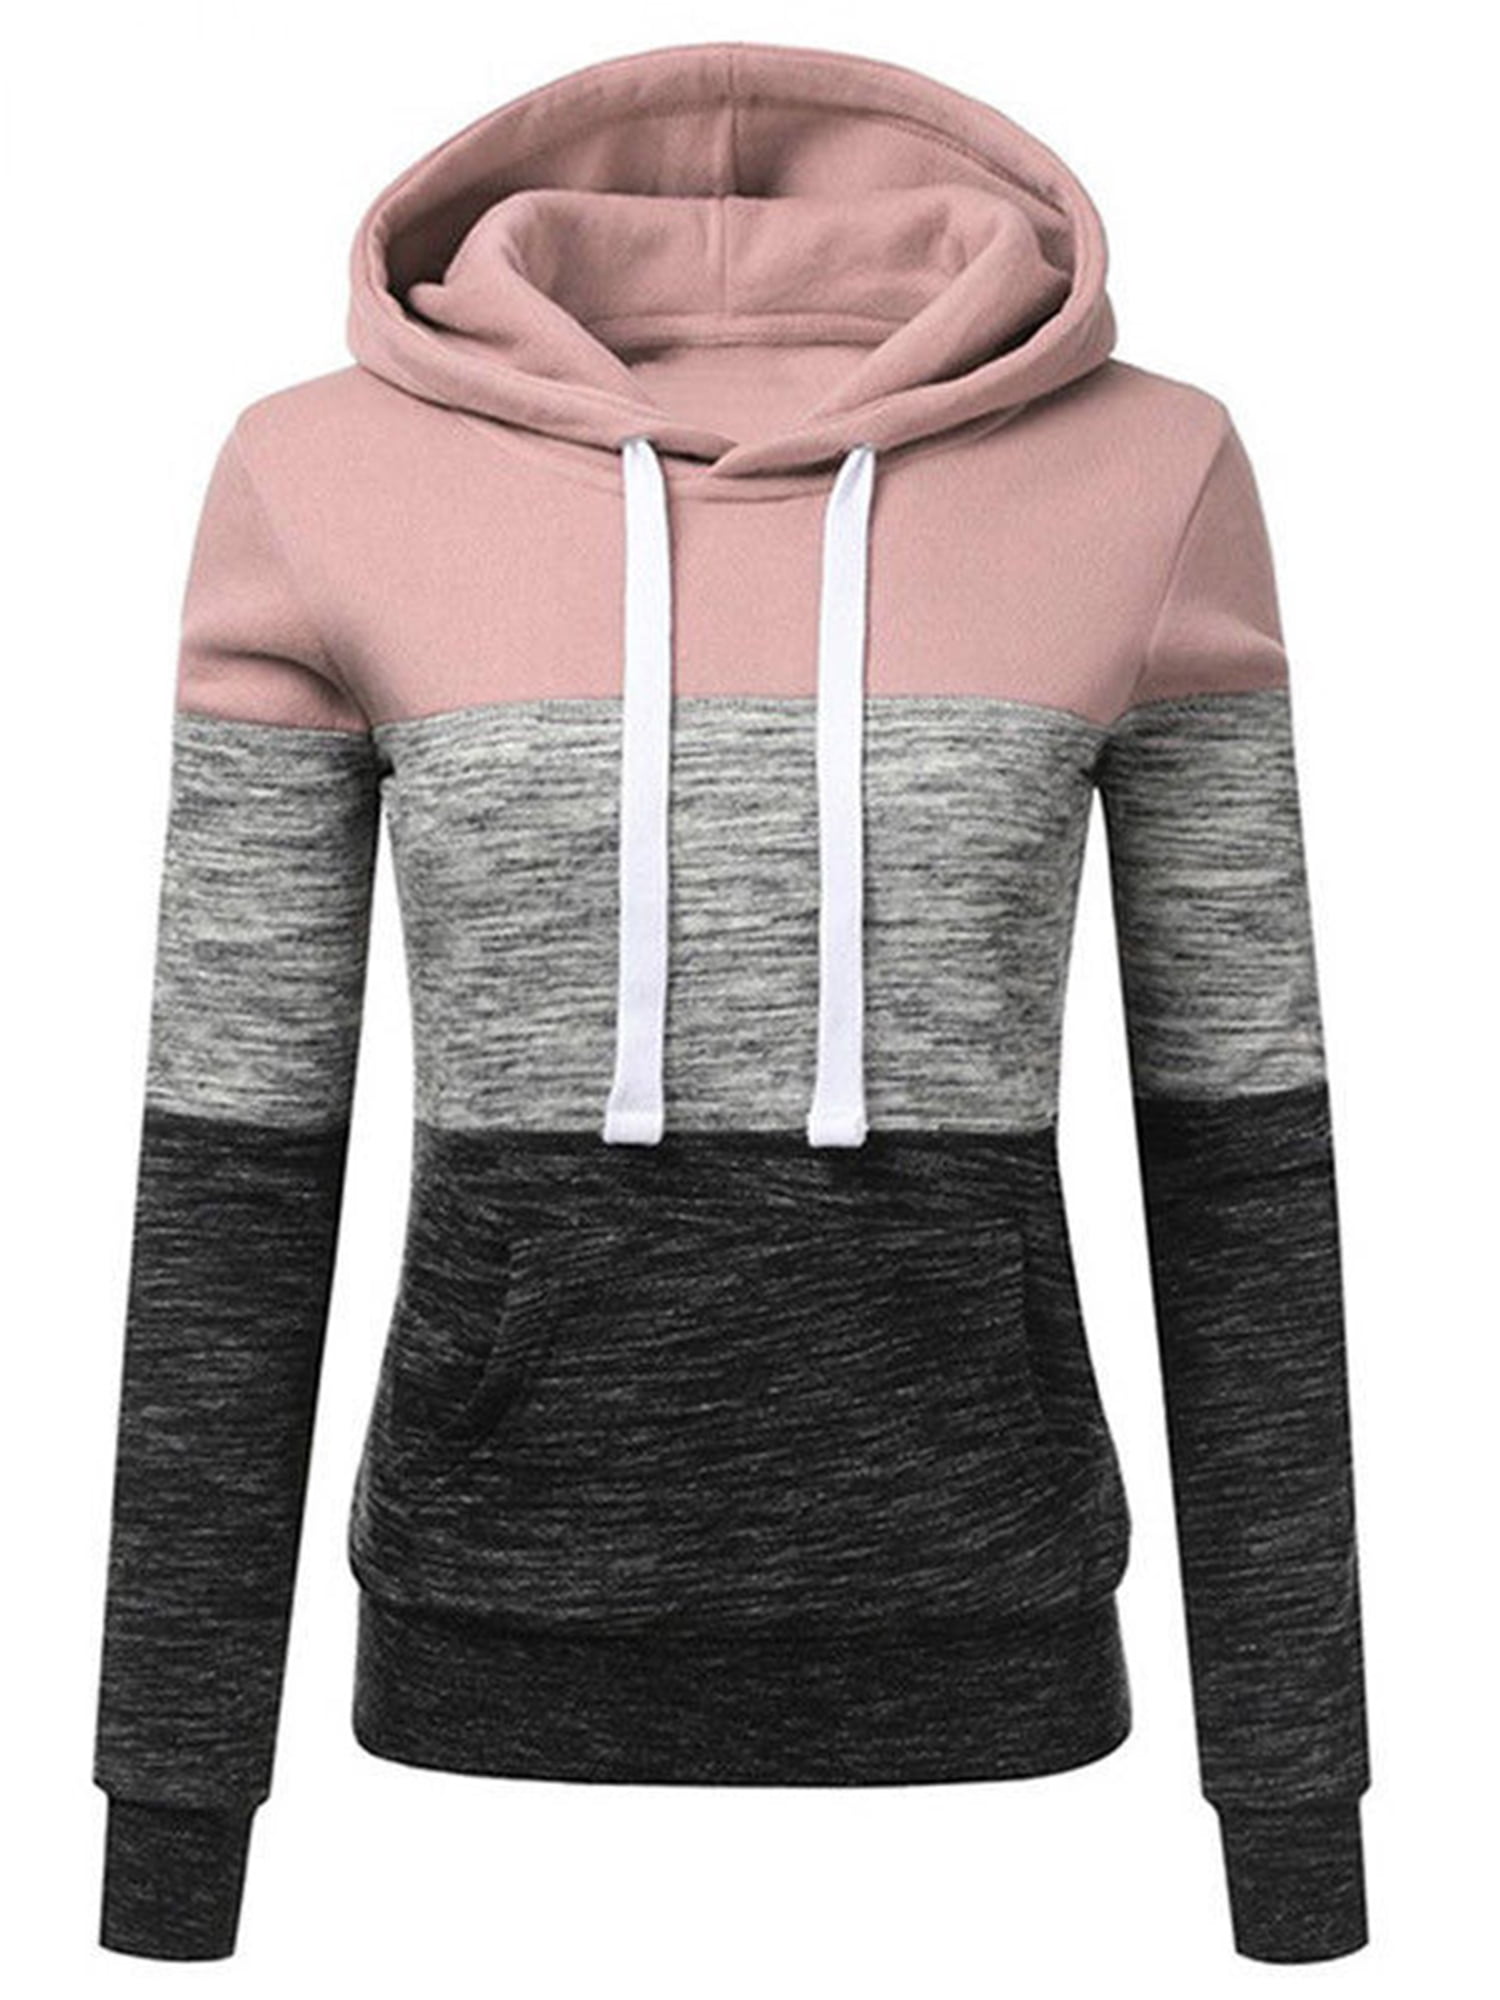 Womens Hoodie Sweatshirt Pullover Spices Kitchen Pattern Casual Hooded Tops 